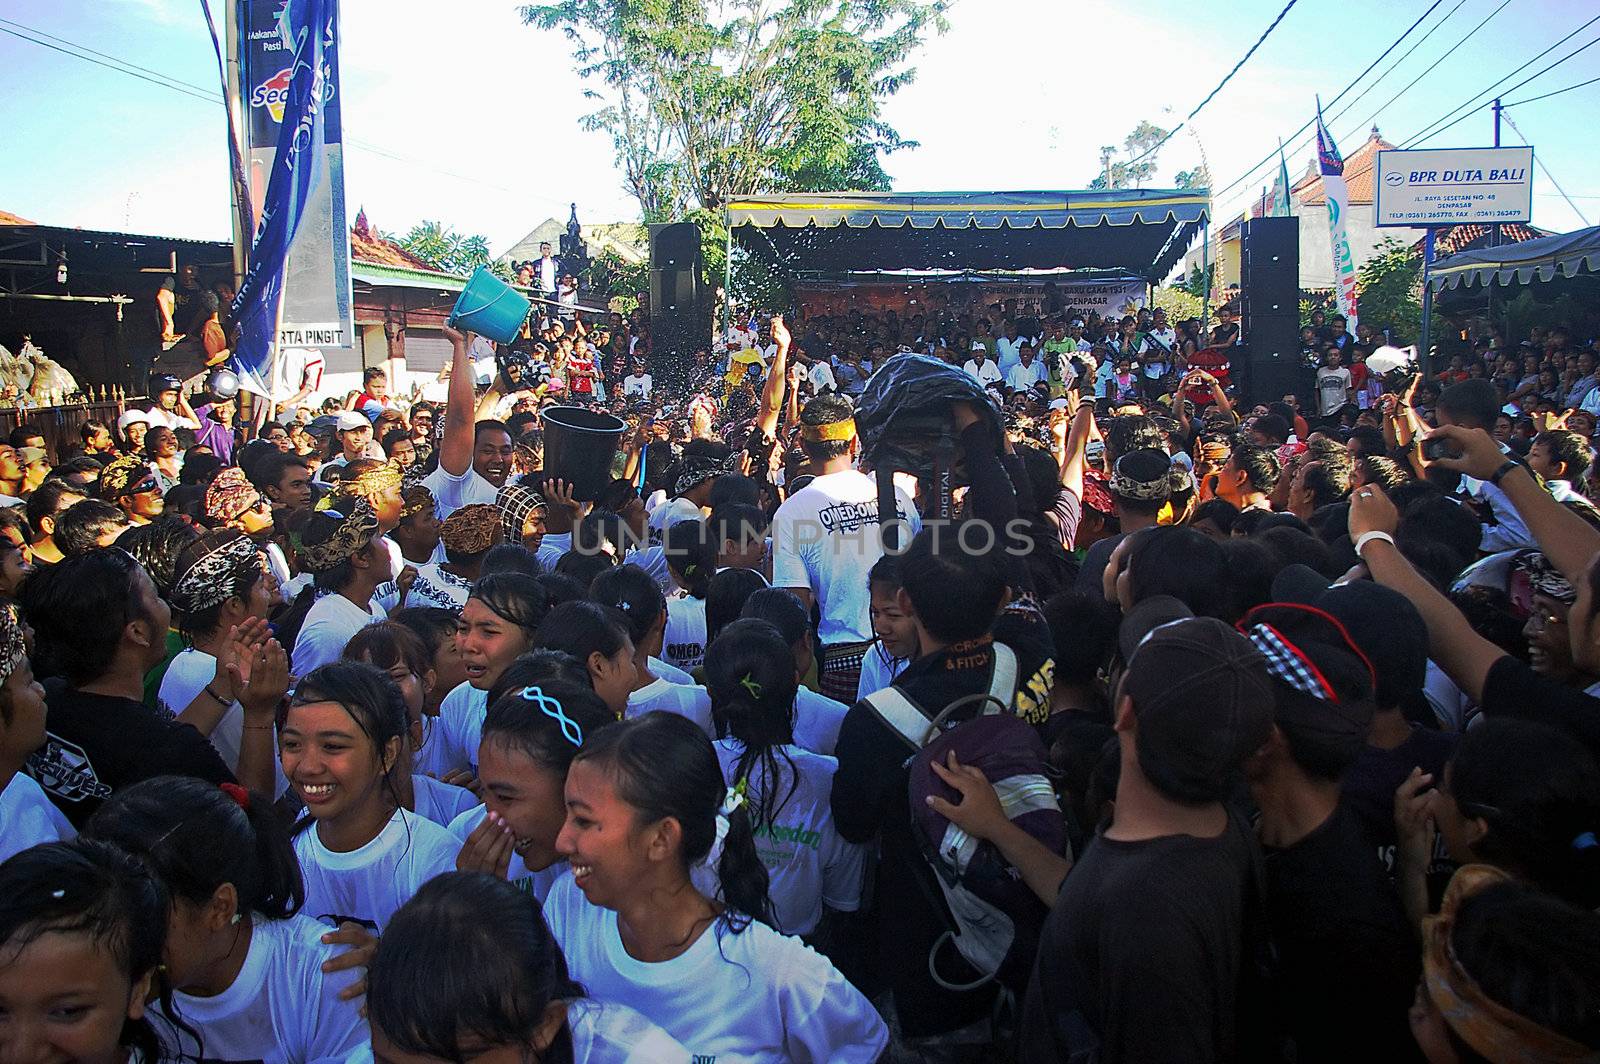 This is a unique event where unmarried girls and boys are required to publicly kiss as part of Balinese New Year celebrations. The kissing is said to throw out the bad luck attained in the last year and bring good luck for the new one. The girls and boys either run or are carried to each other and only know who they will kiss once they meet in the middle. The crowds and participants are doused in water. The event is called Omed Omedan and is only held in Denpasar, the capital of Bali. 27/03/2009